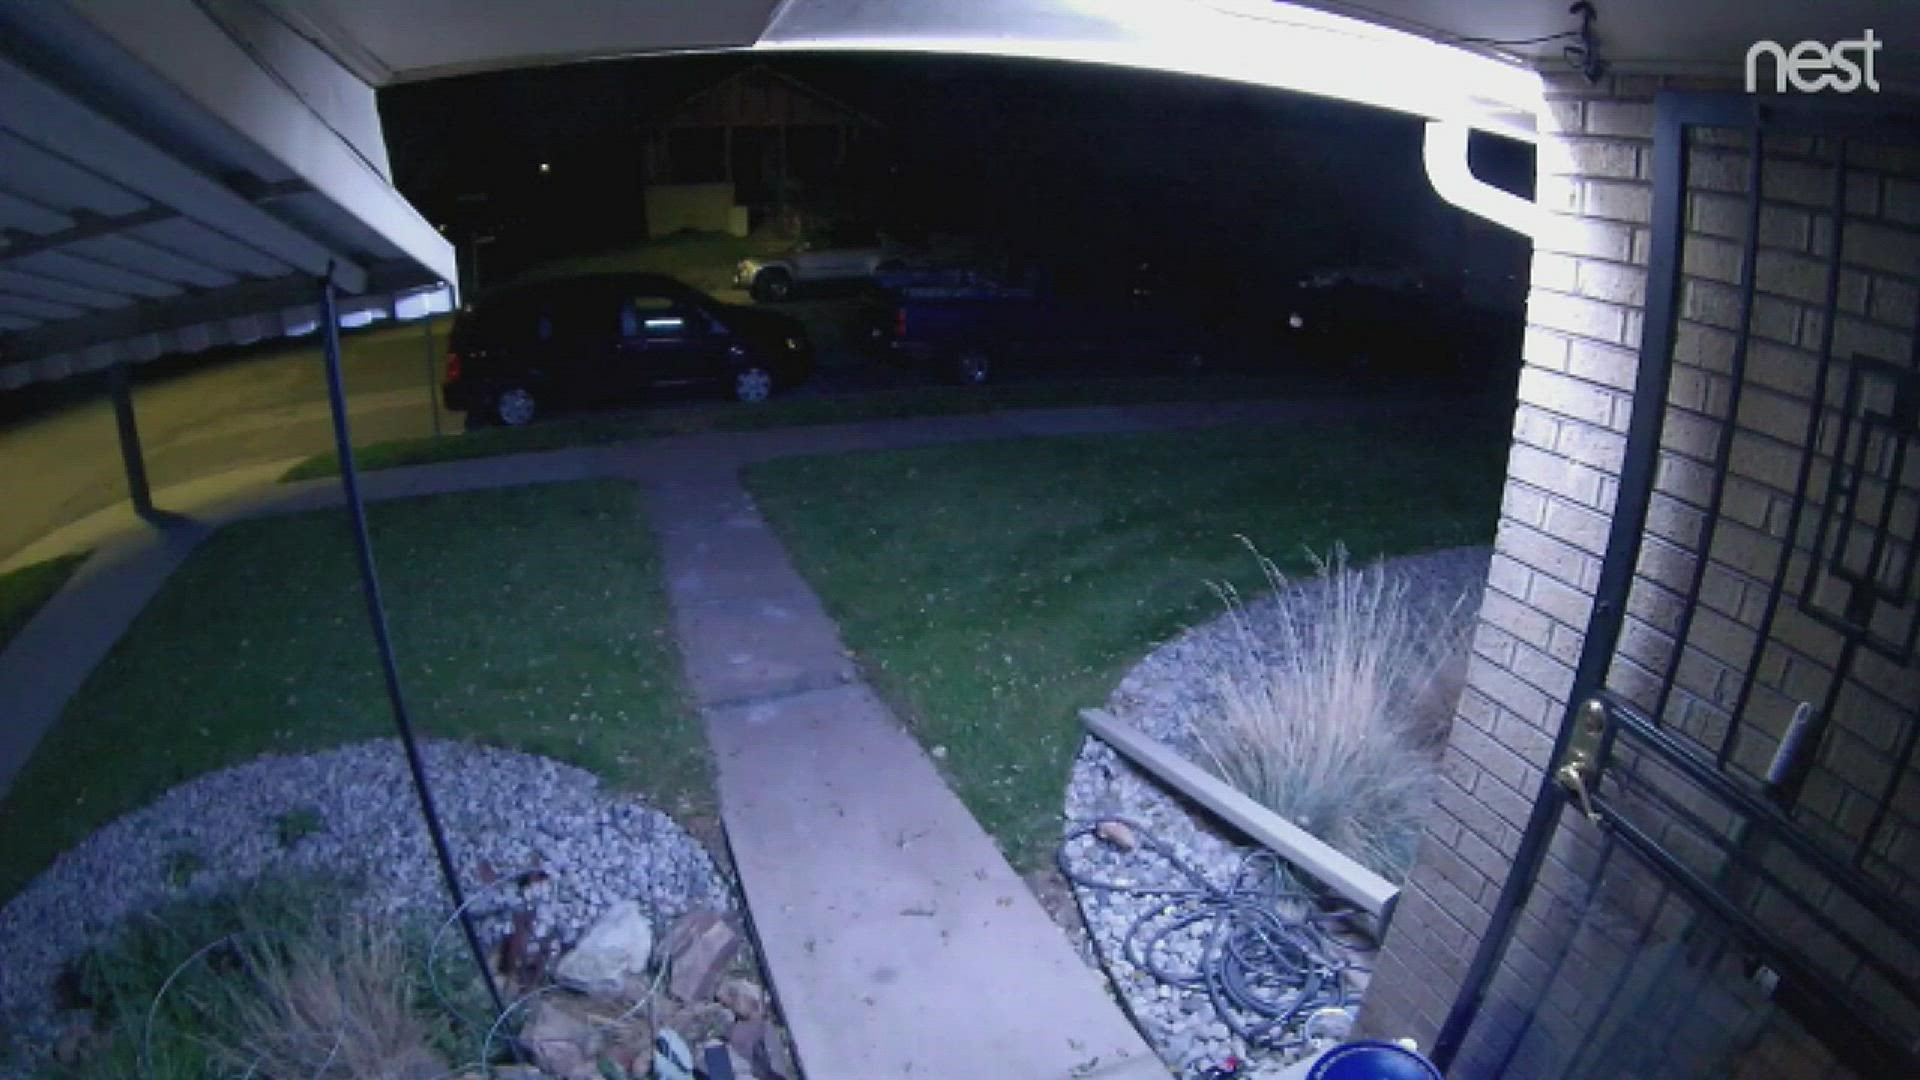 Home security video shows former Denver Broncos quarterback Chad Kelly being chased from an Englewood home following a trespassing incident in October 2018.